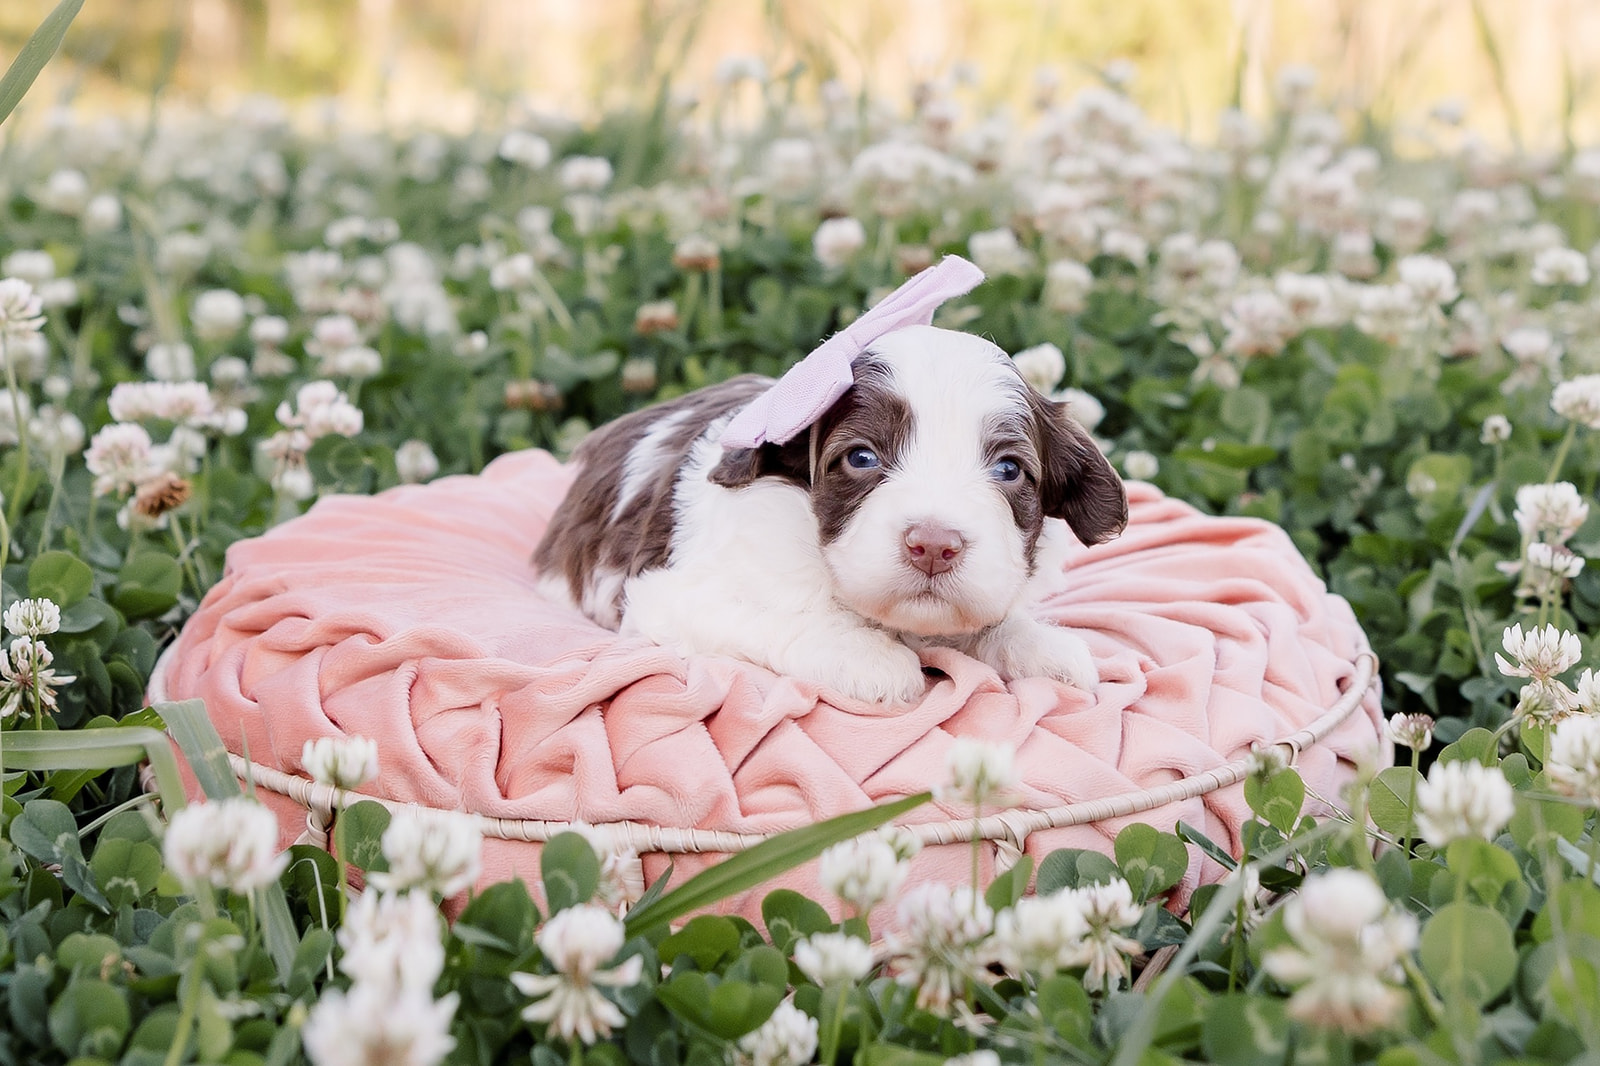 Chocolate Parti Medium Australian Labradoodle laying on a pink pillow among the clover